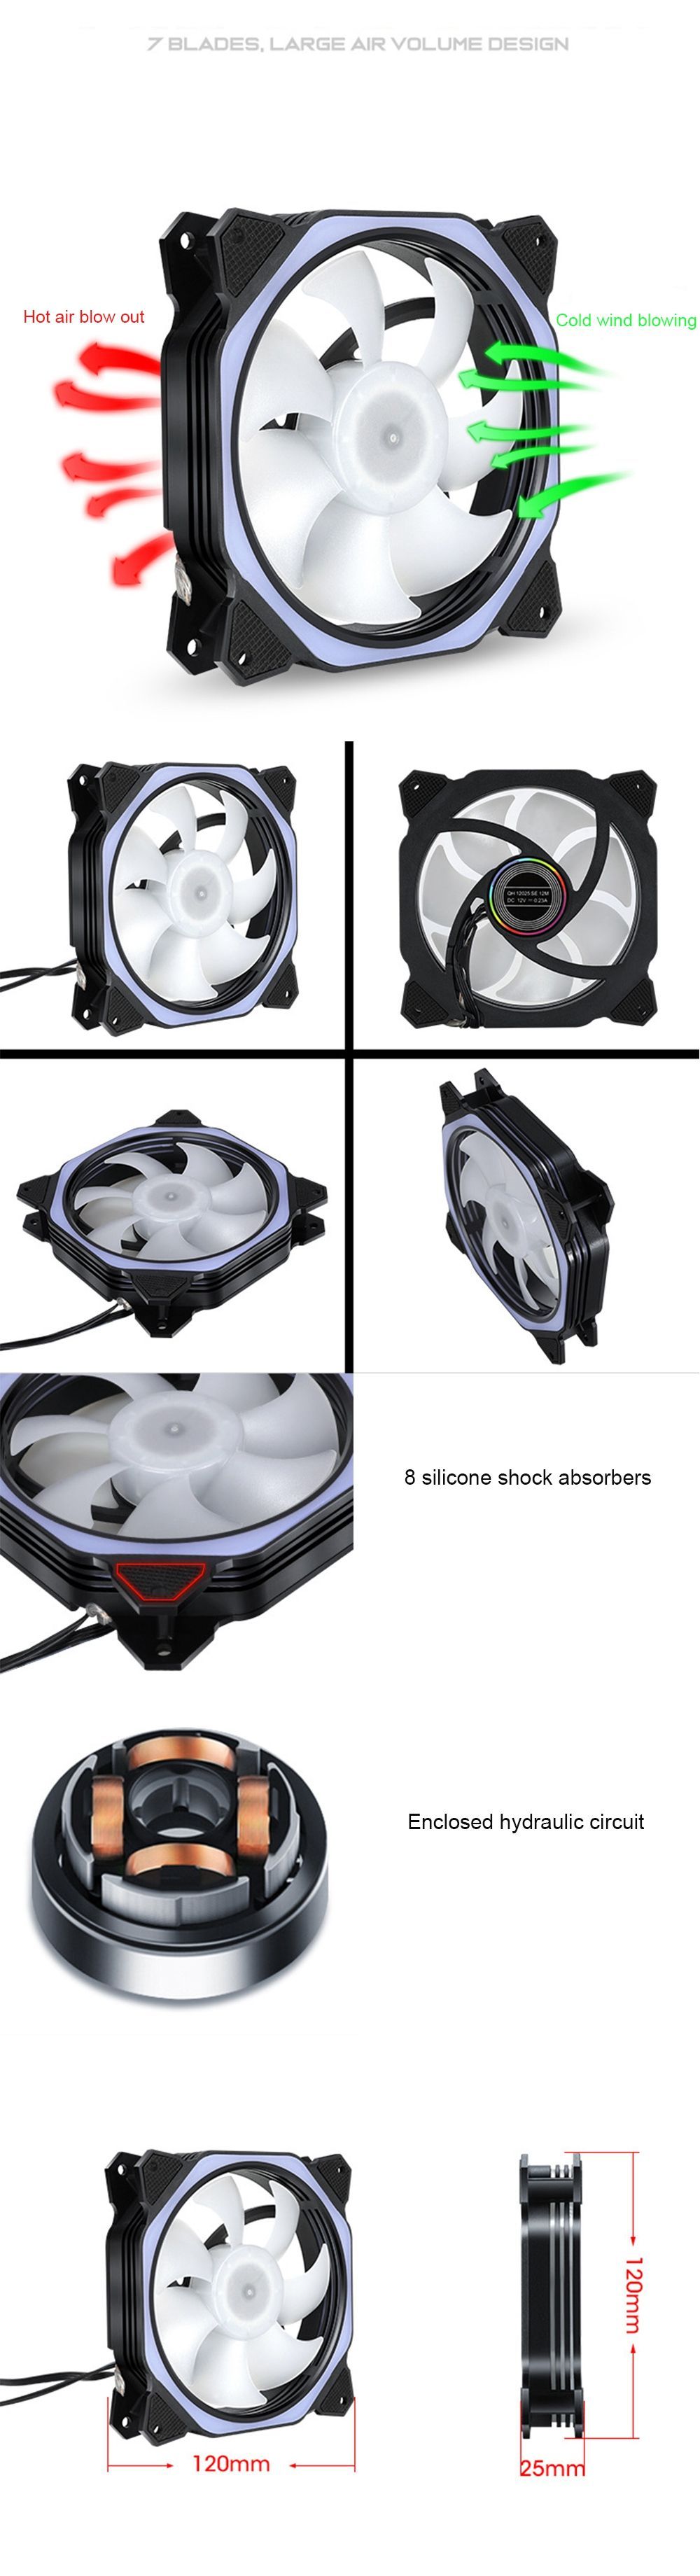 Coolmoon-120mm-Adjustable-RGB-LED-Light-CPU-Cooling-Fan-Mute-Octagon-Computer-PC-Case-Cooling-Fan-1582520